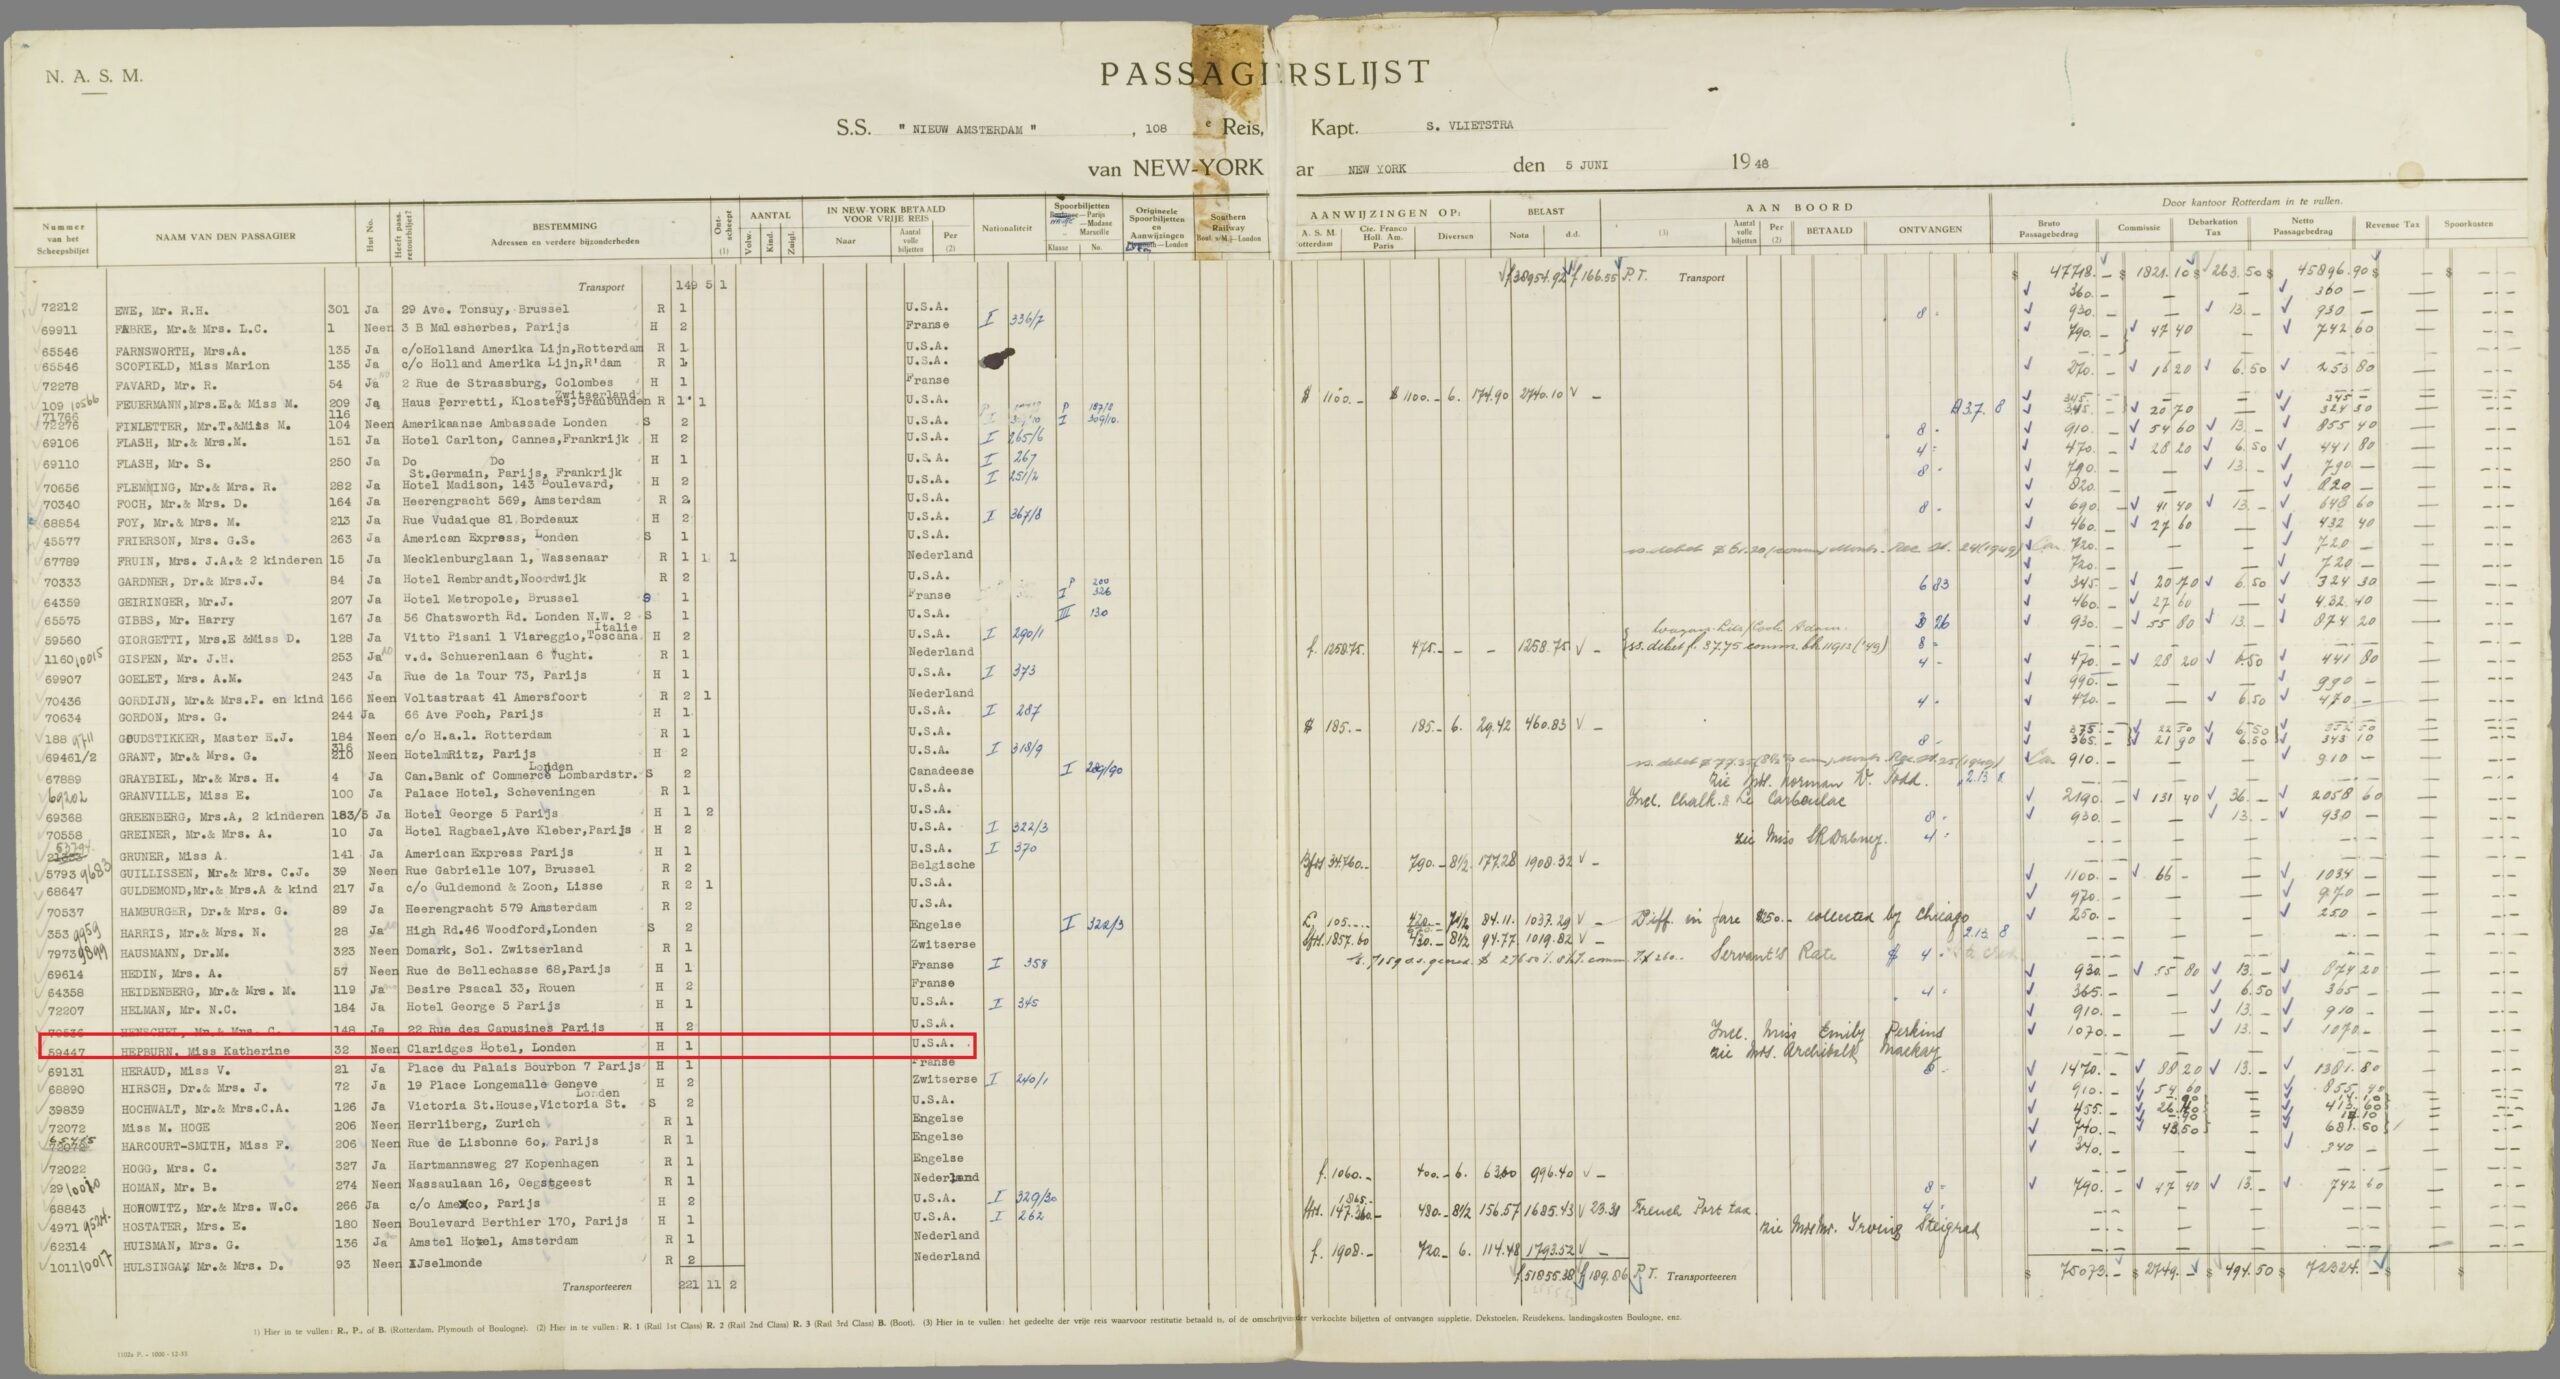 Katharine Hepburn in The Netherlands, Holland-America Line, Passenger Lists collection on MyHeritage